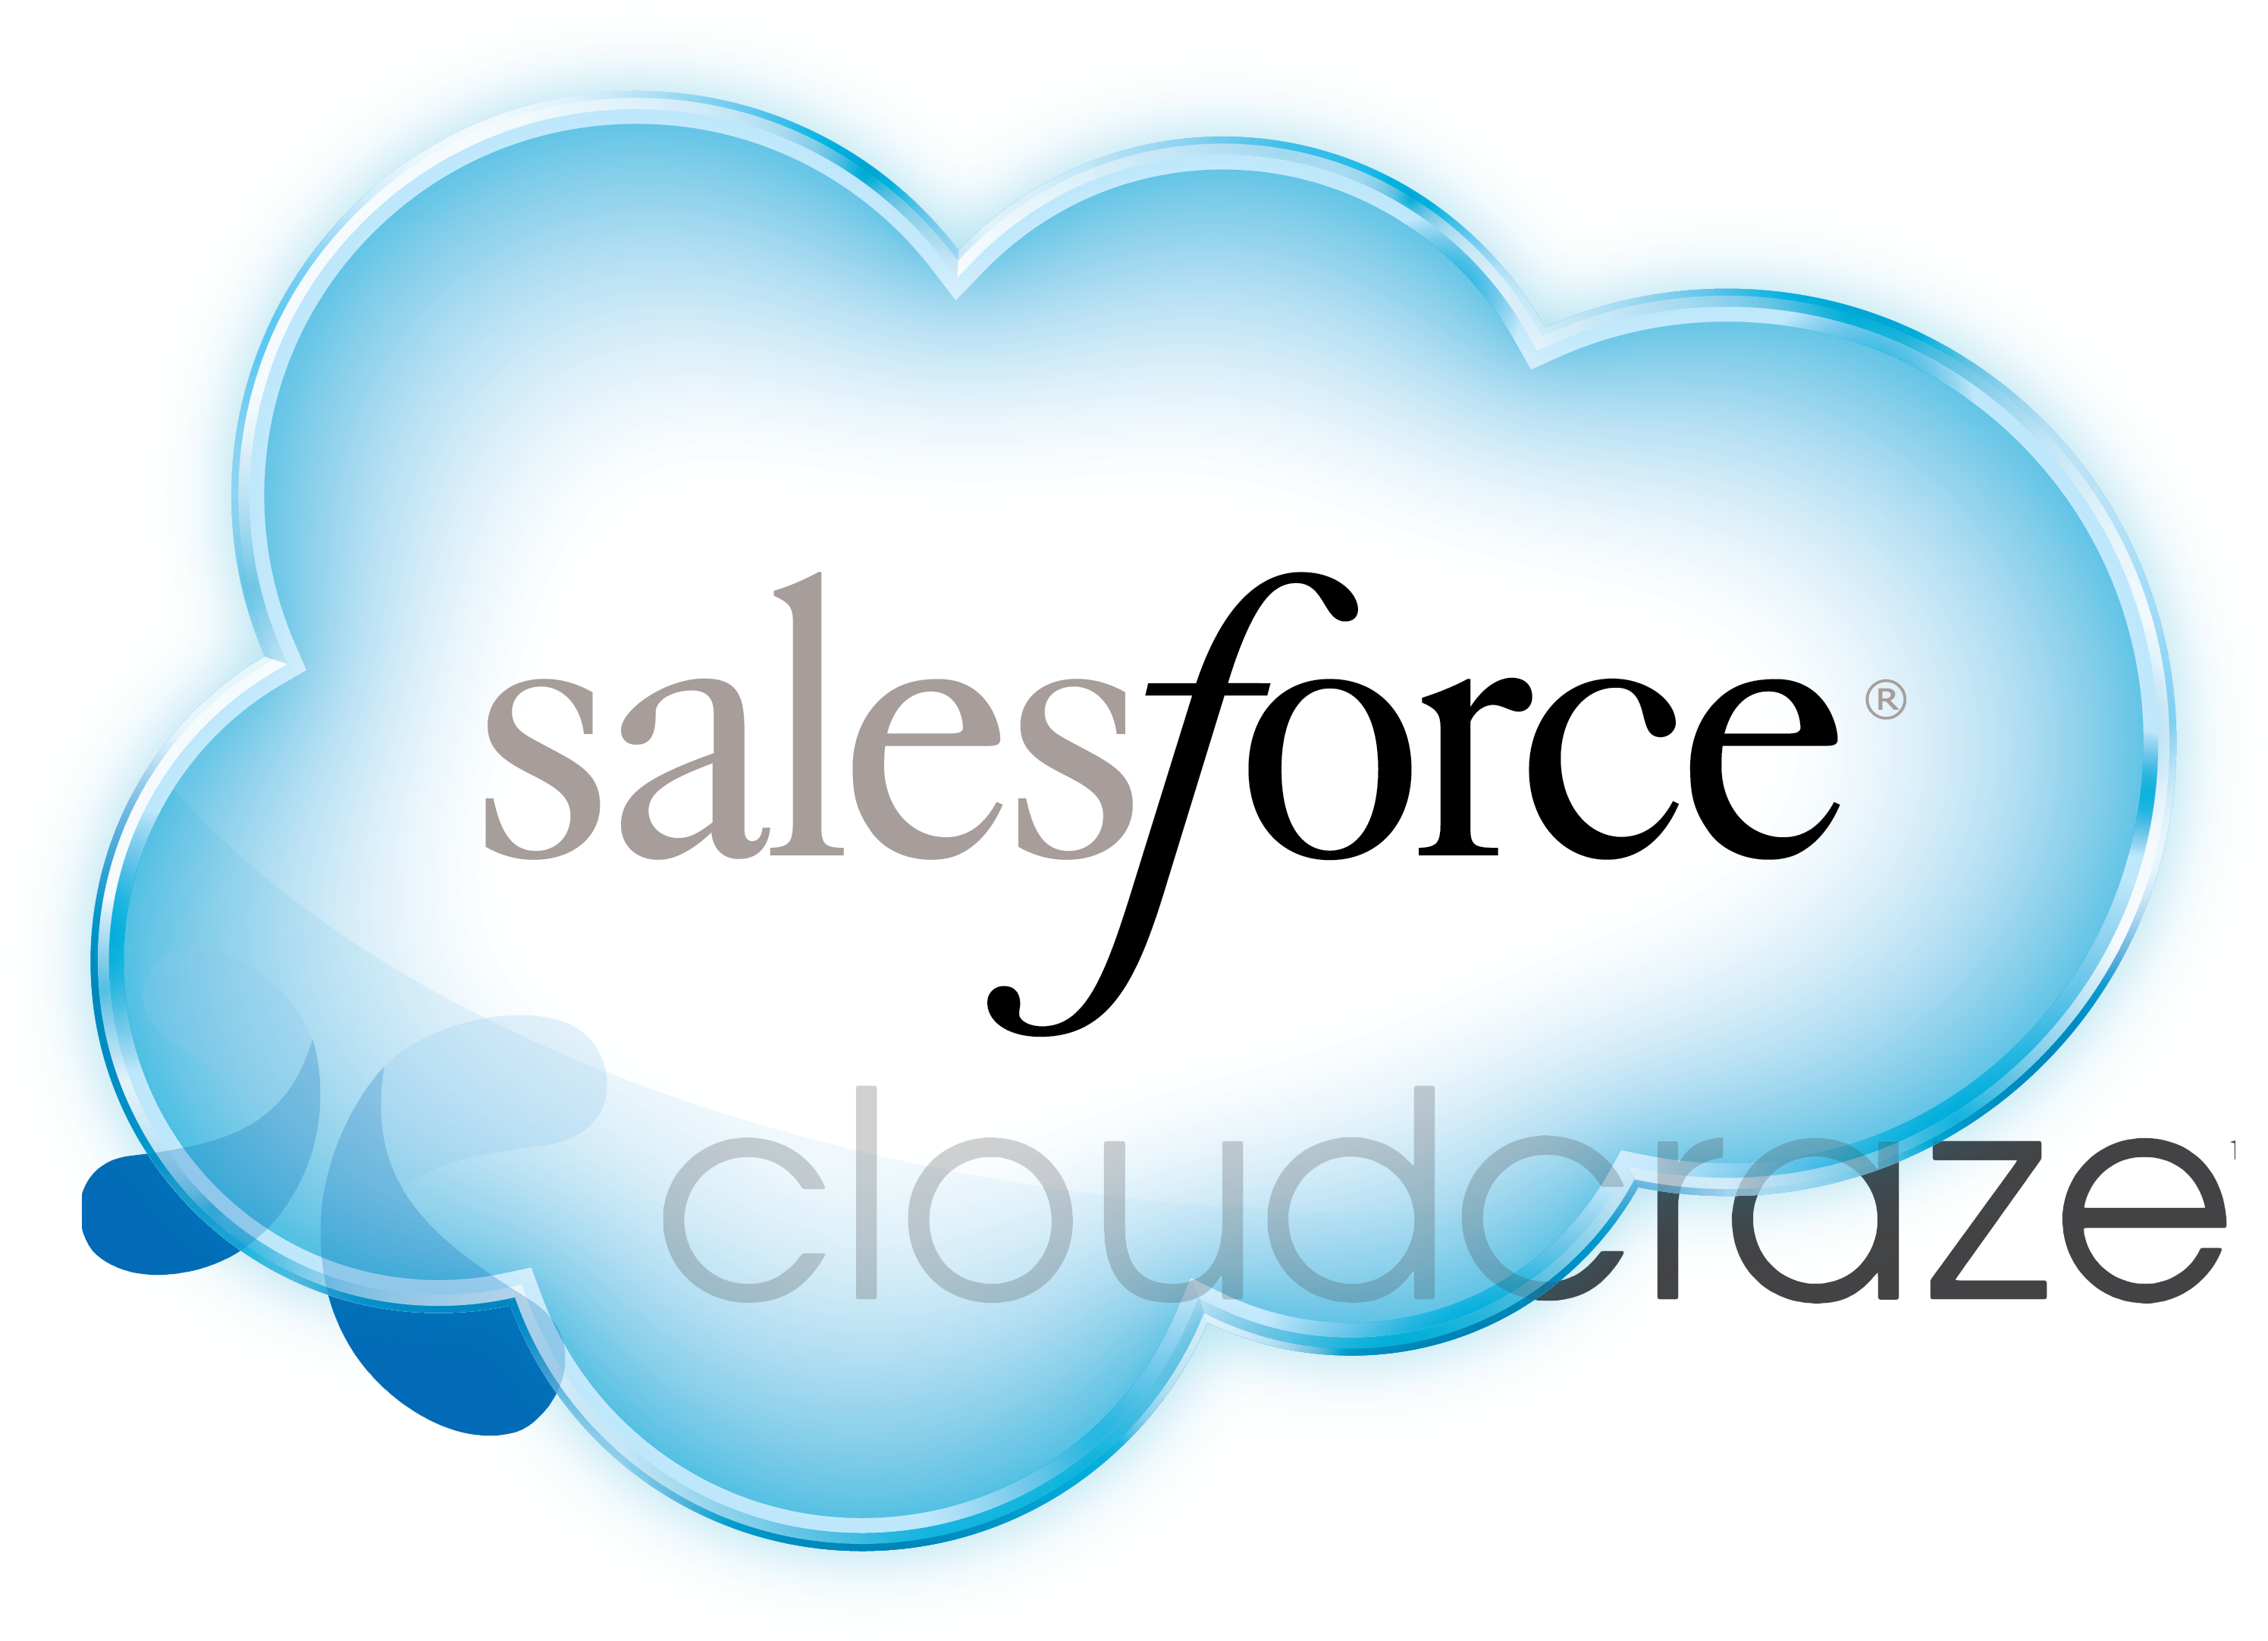 Salesforce Acquires CloudCraze: What it means for both companies and their customers